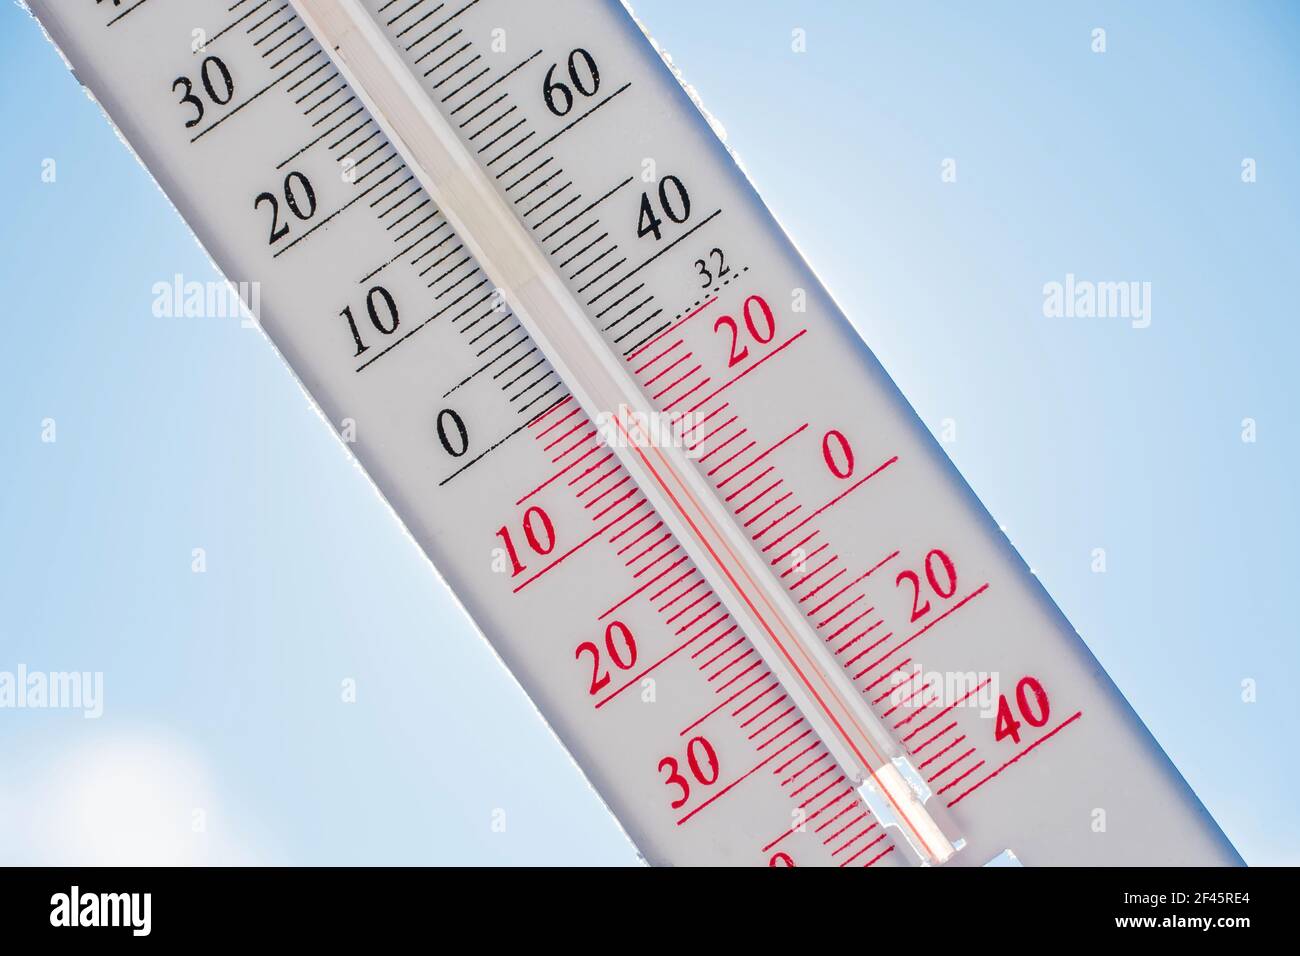 Thermometer thermostat instrument to measure air temperature Stock Photo -  Alamy